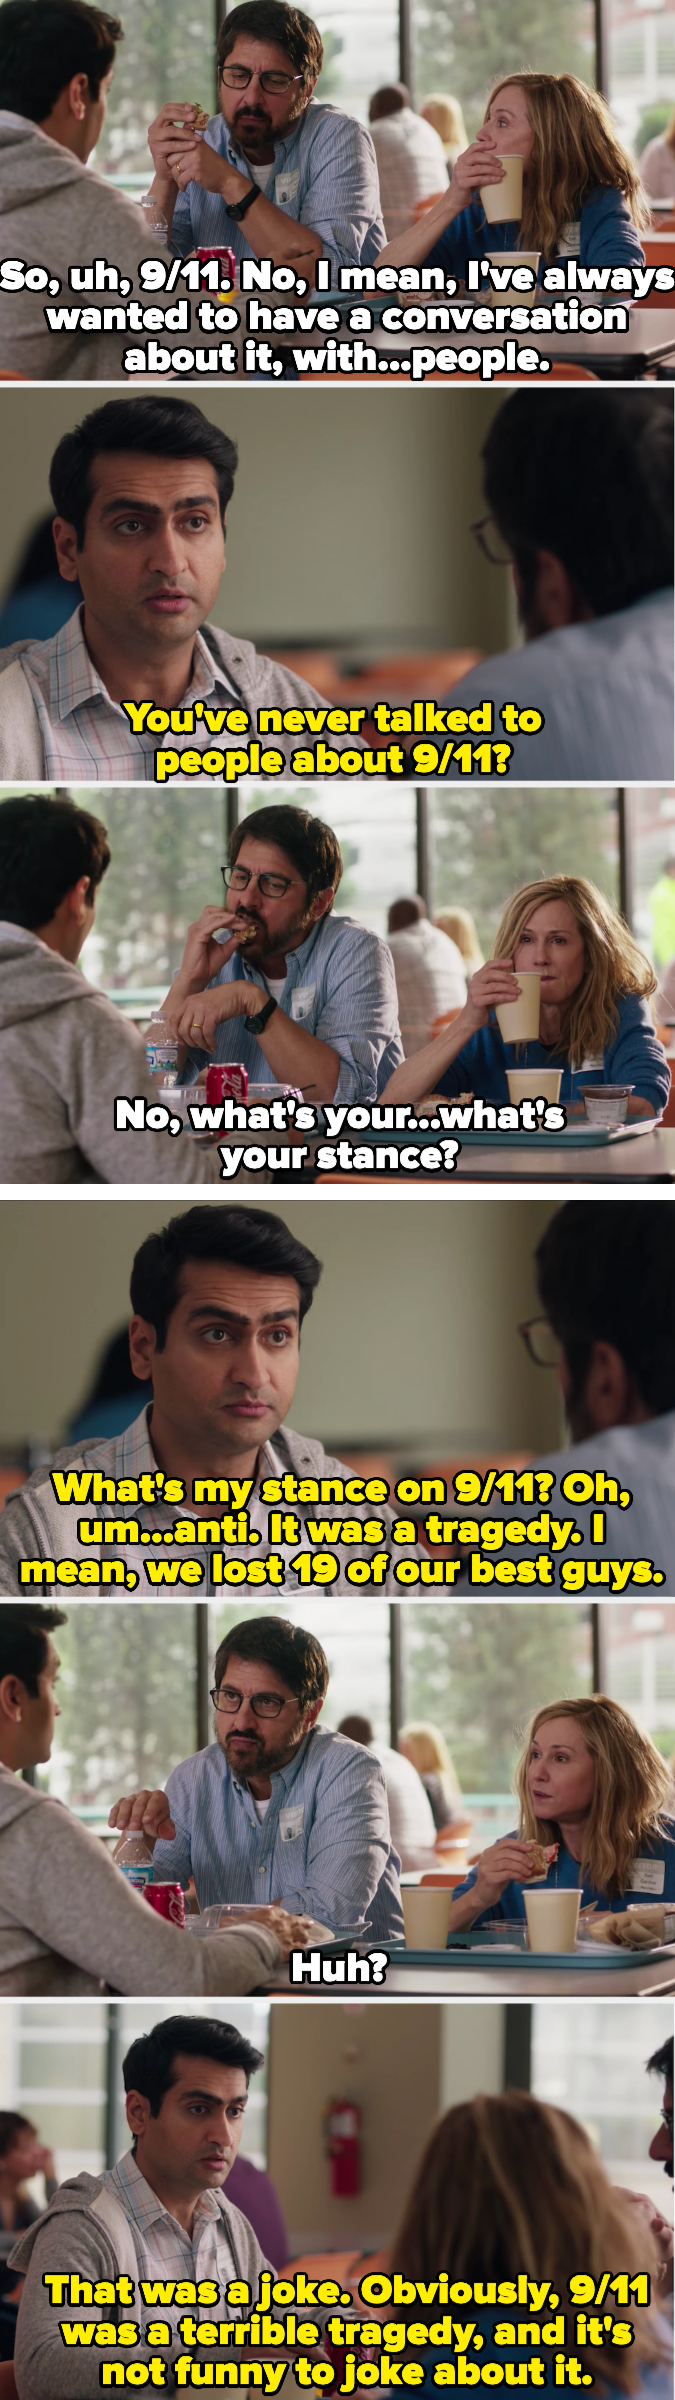 When his future father in law asks Kumail&#x27;s opinion about 9/11, he jokes that they lost 19 of their best guys that day